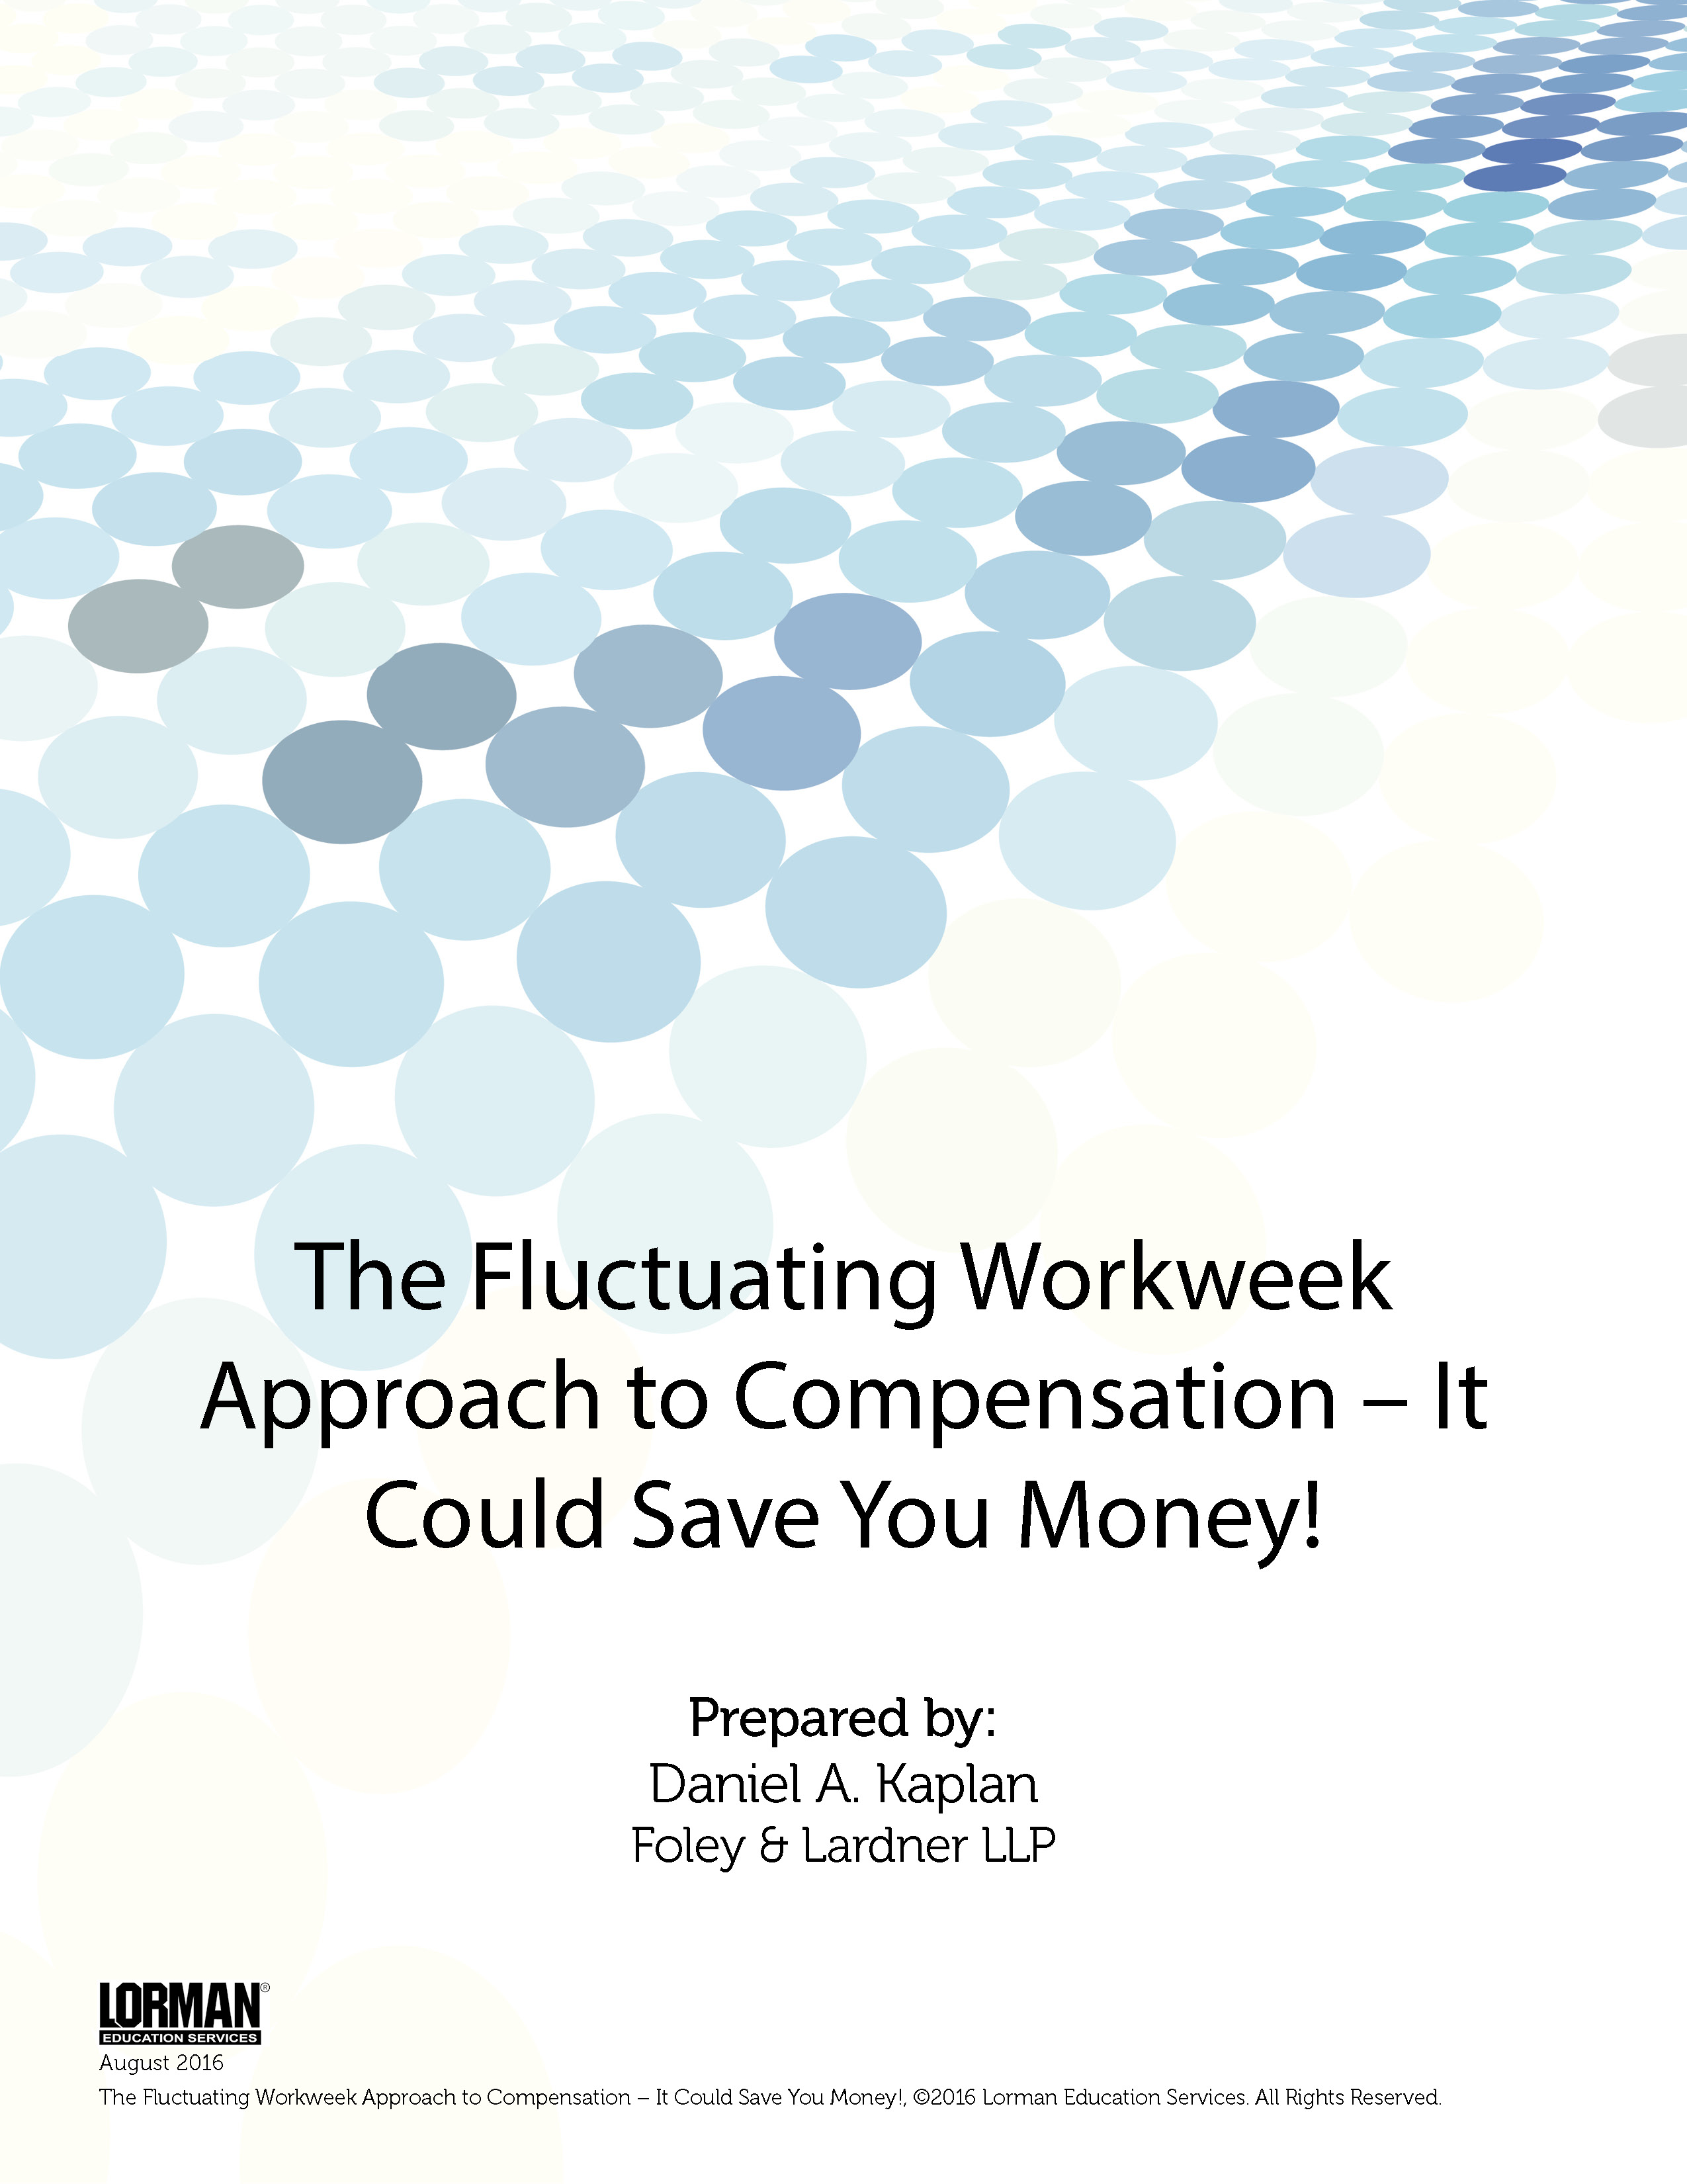 The Fluctuating Workweek Approach to Compensation - It Could Save You Money!